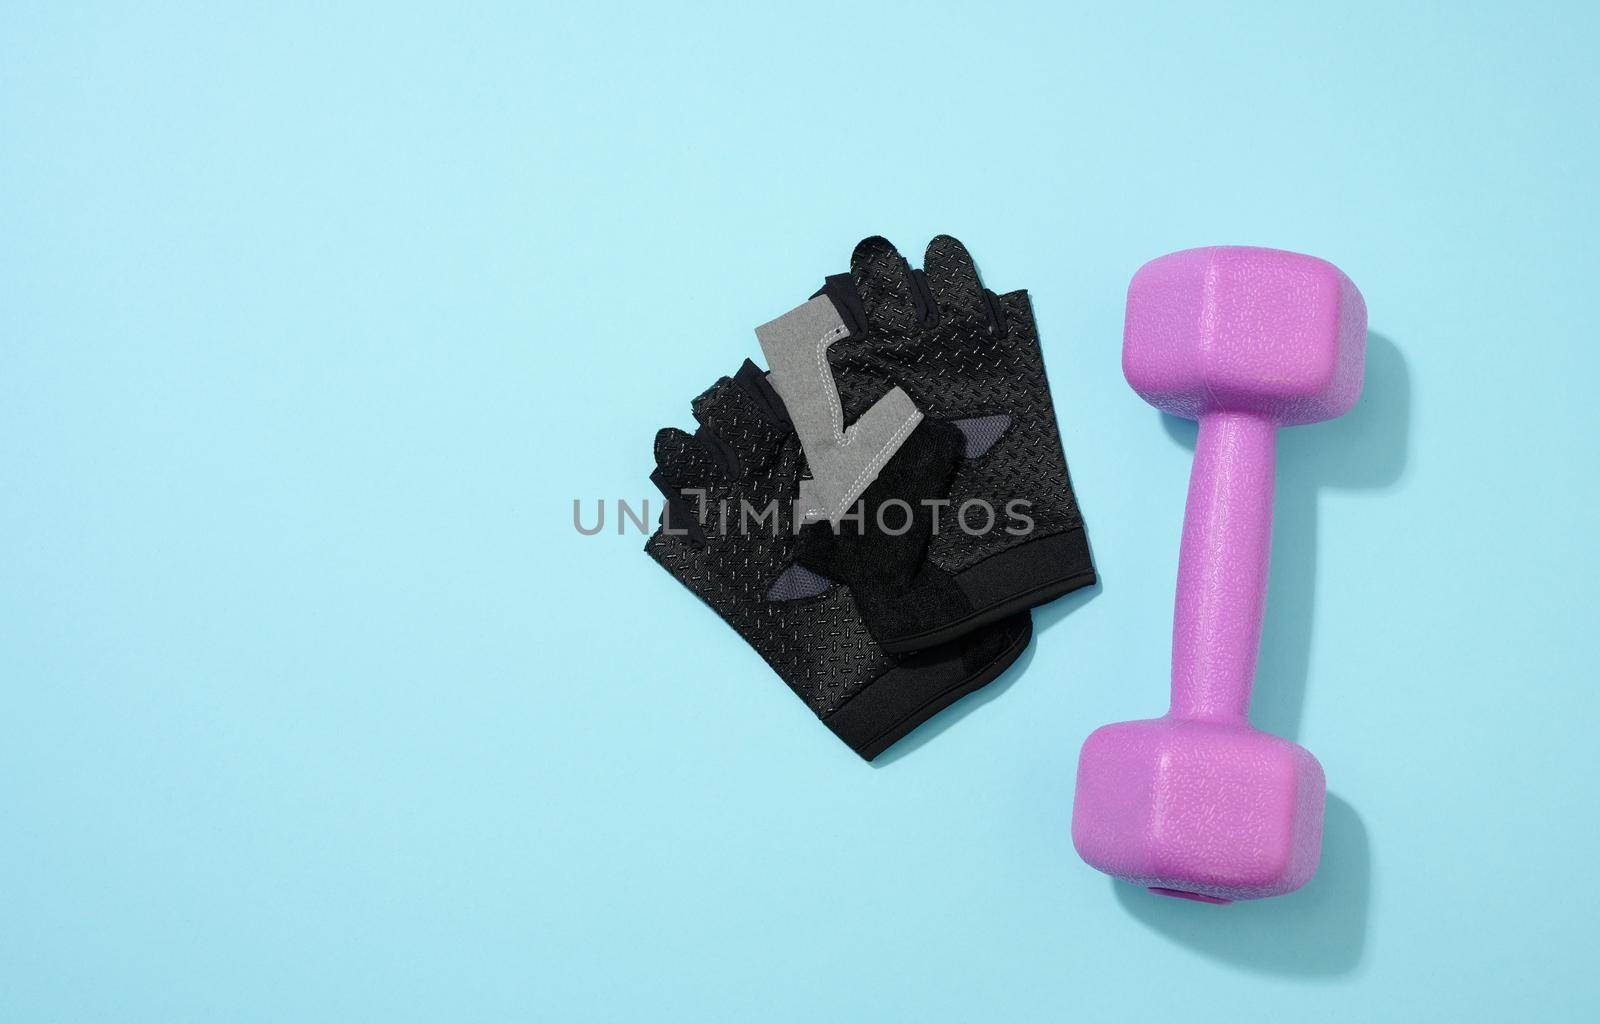 black ports gloves, pair of purple dumbbells on a blue background, healthy lifestyle by ndanko